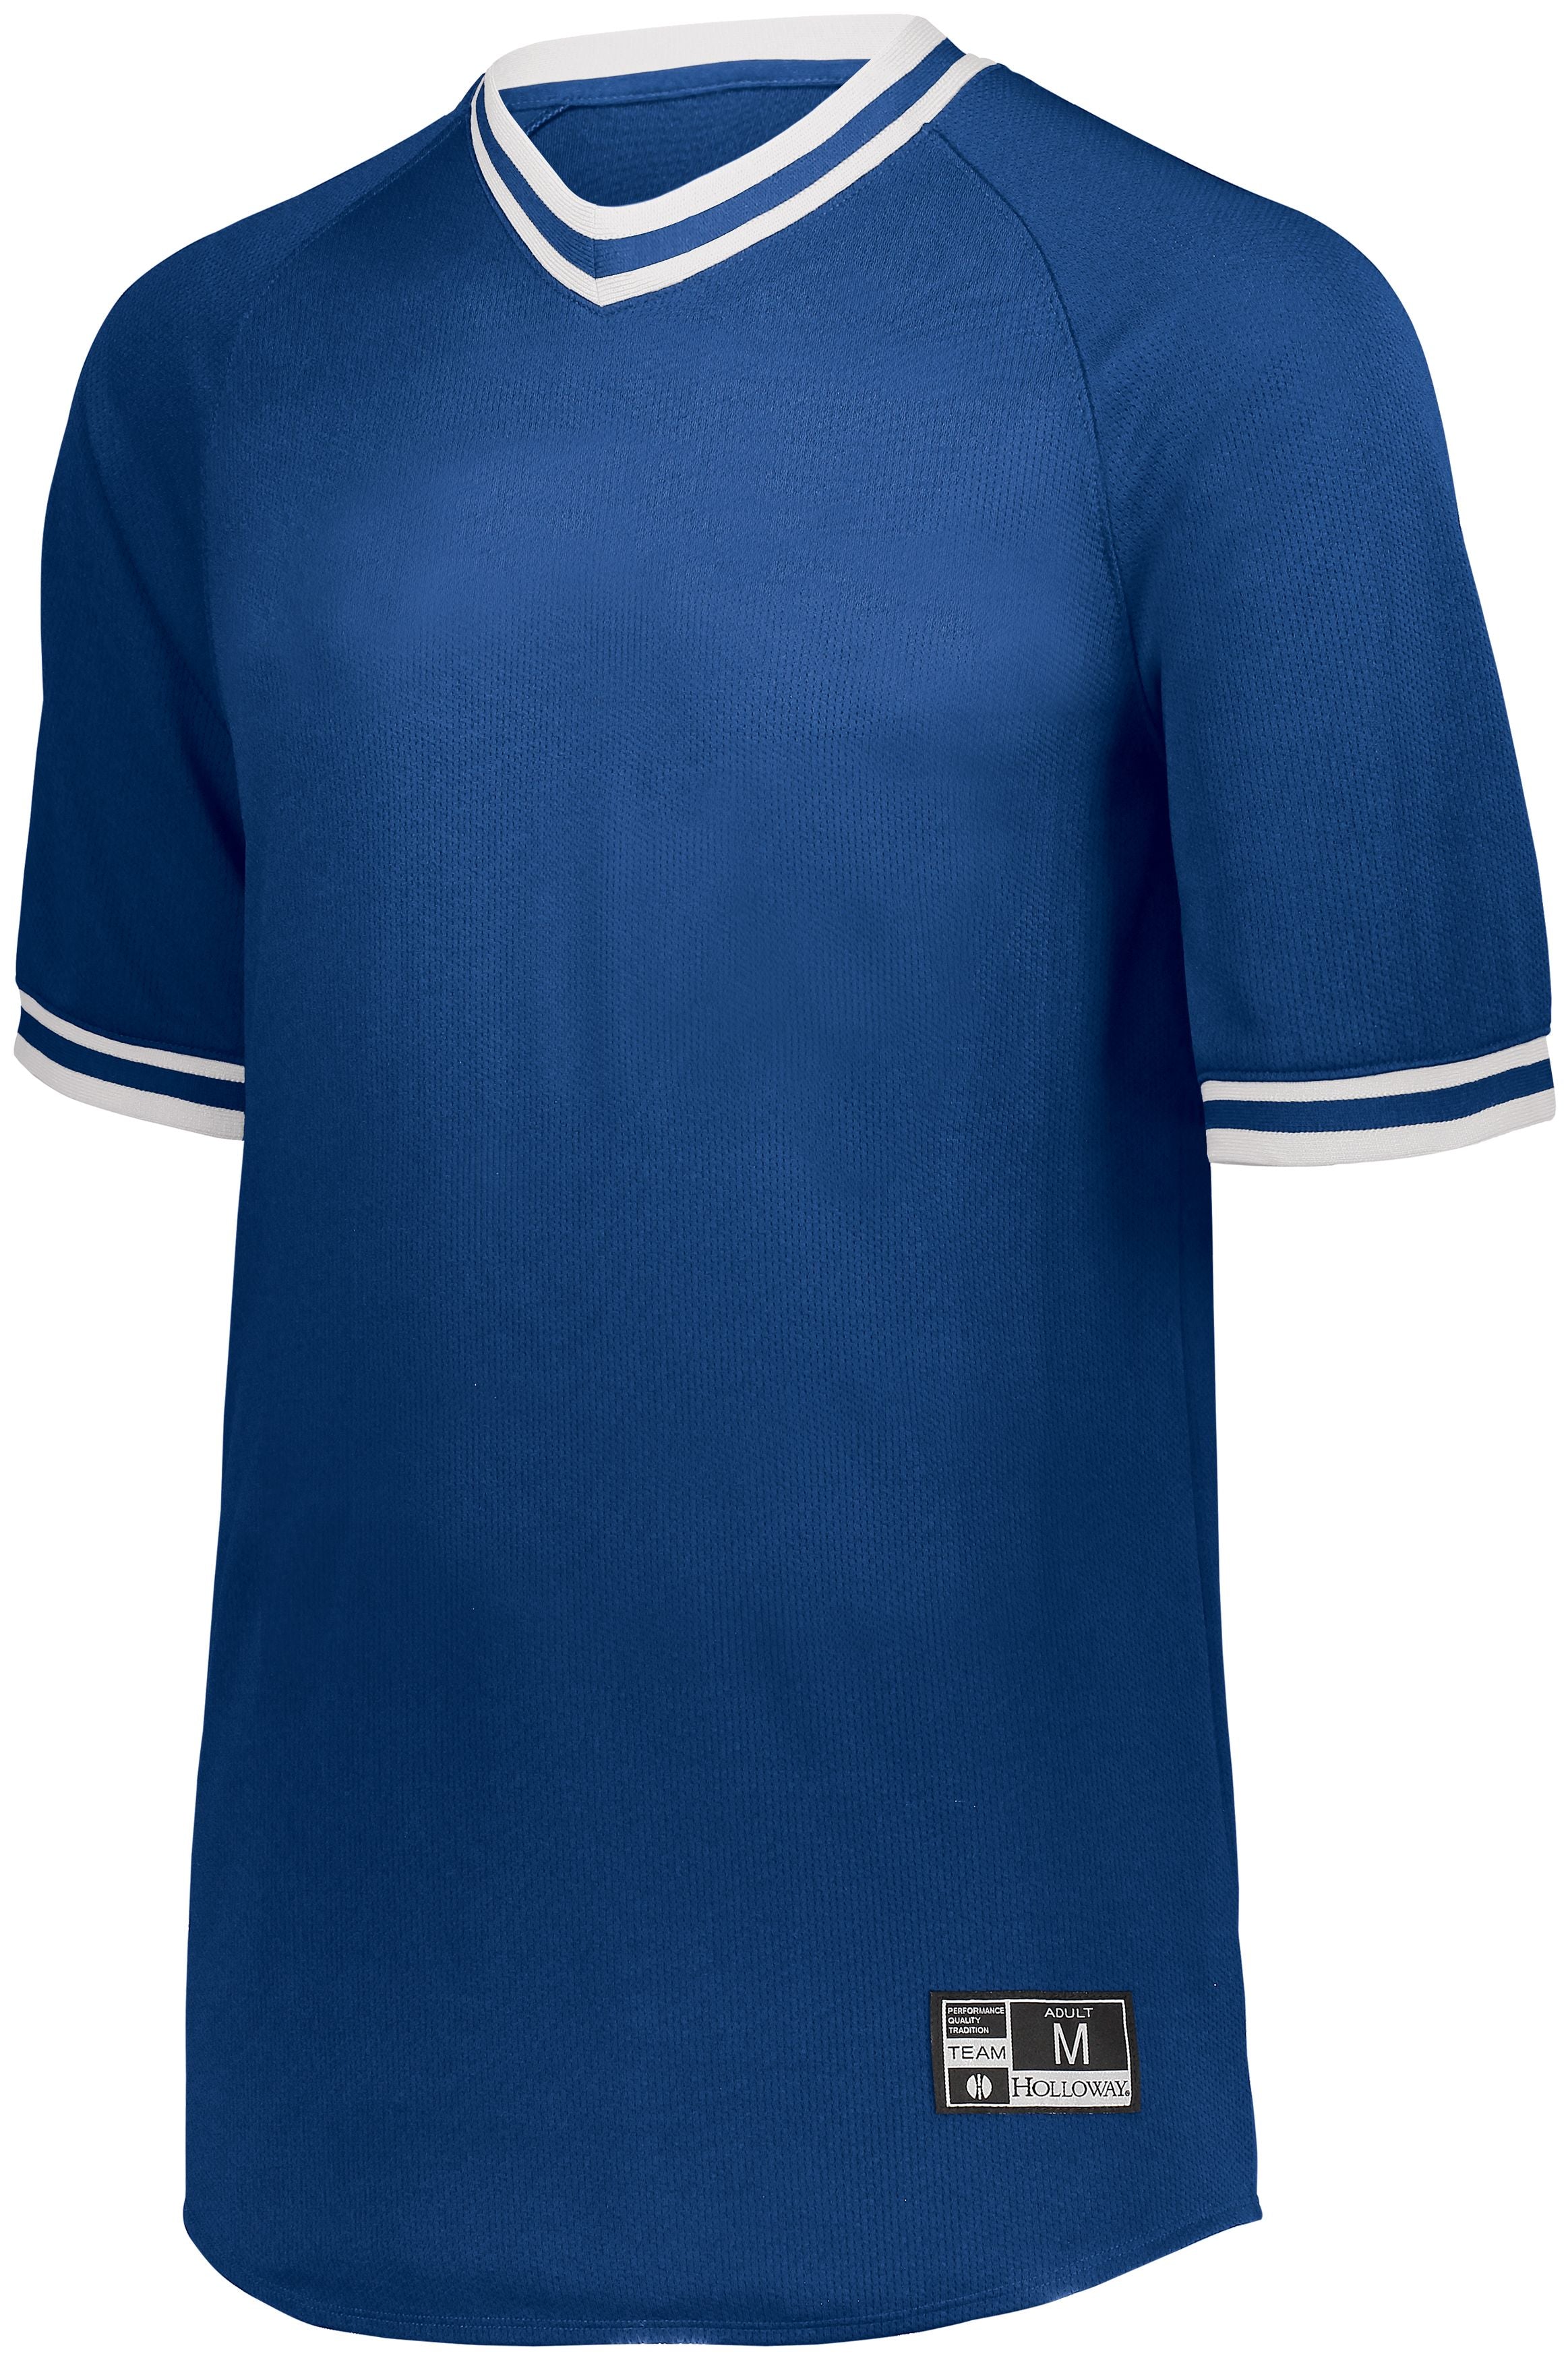 Holloway Youth Retro V-Neck Baseball Jersey in Royal/White  -Part of the Youth, Youth-Jersey, Baseball, Holloway, Shirts, All-Sports, All-Sports-1 product lines at KanaleyCreations.com